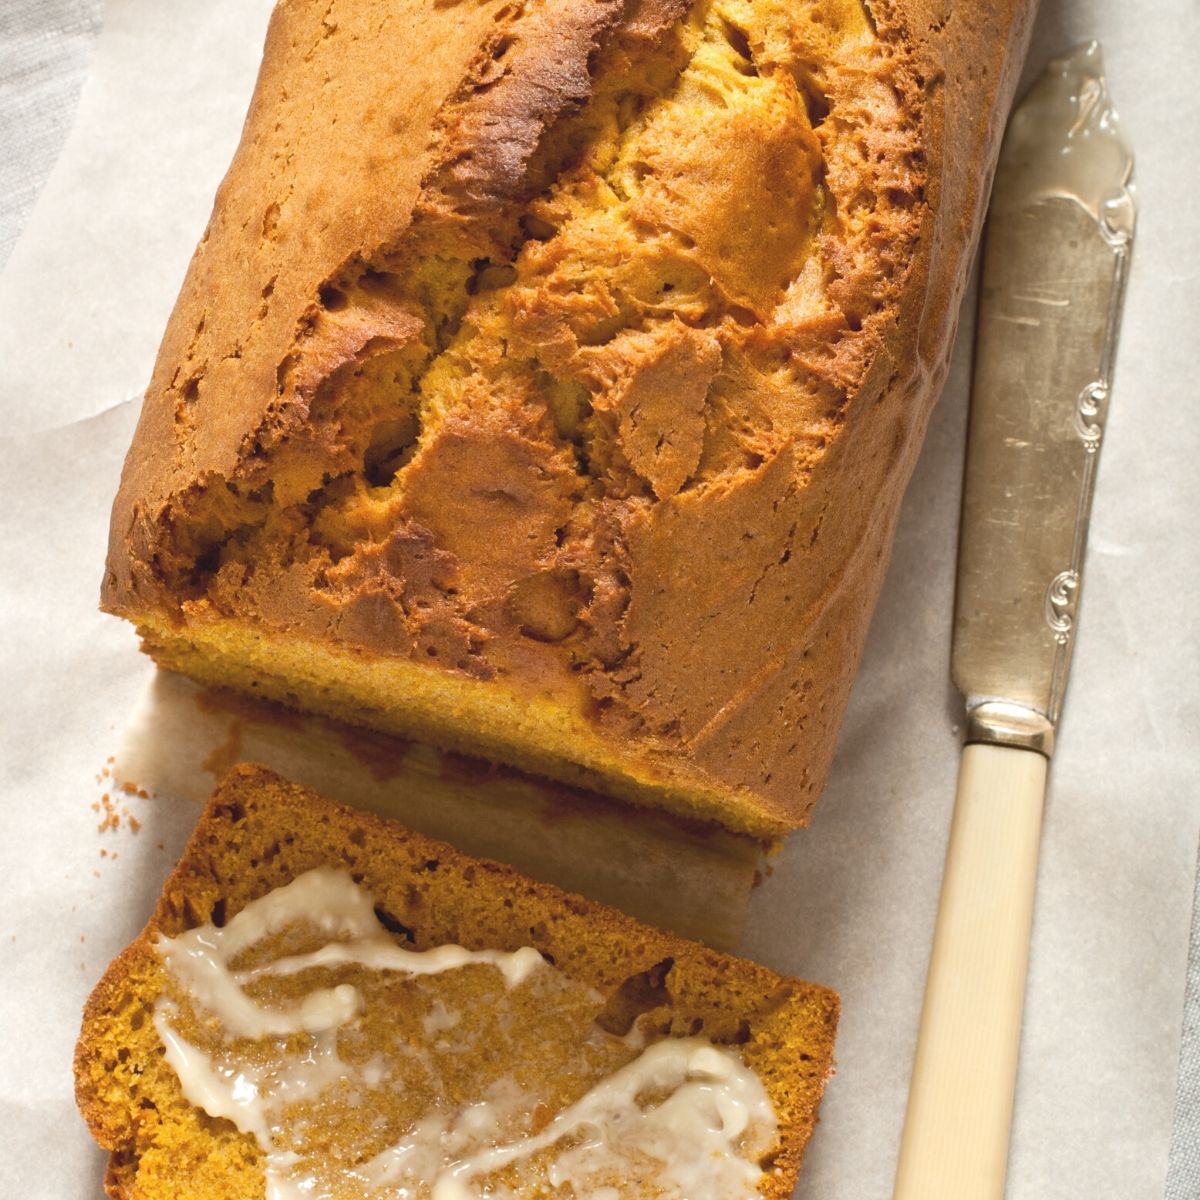 freshly baked sourdough pumpkin banana bread loaf. one piece is sliced off the end and slathered with butter. A vintage butter knife sits nearby with butter on it.